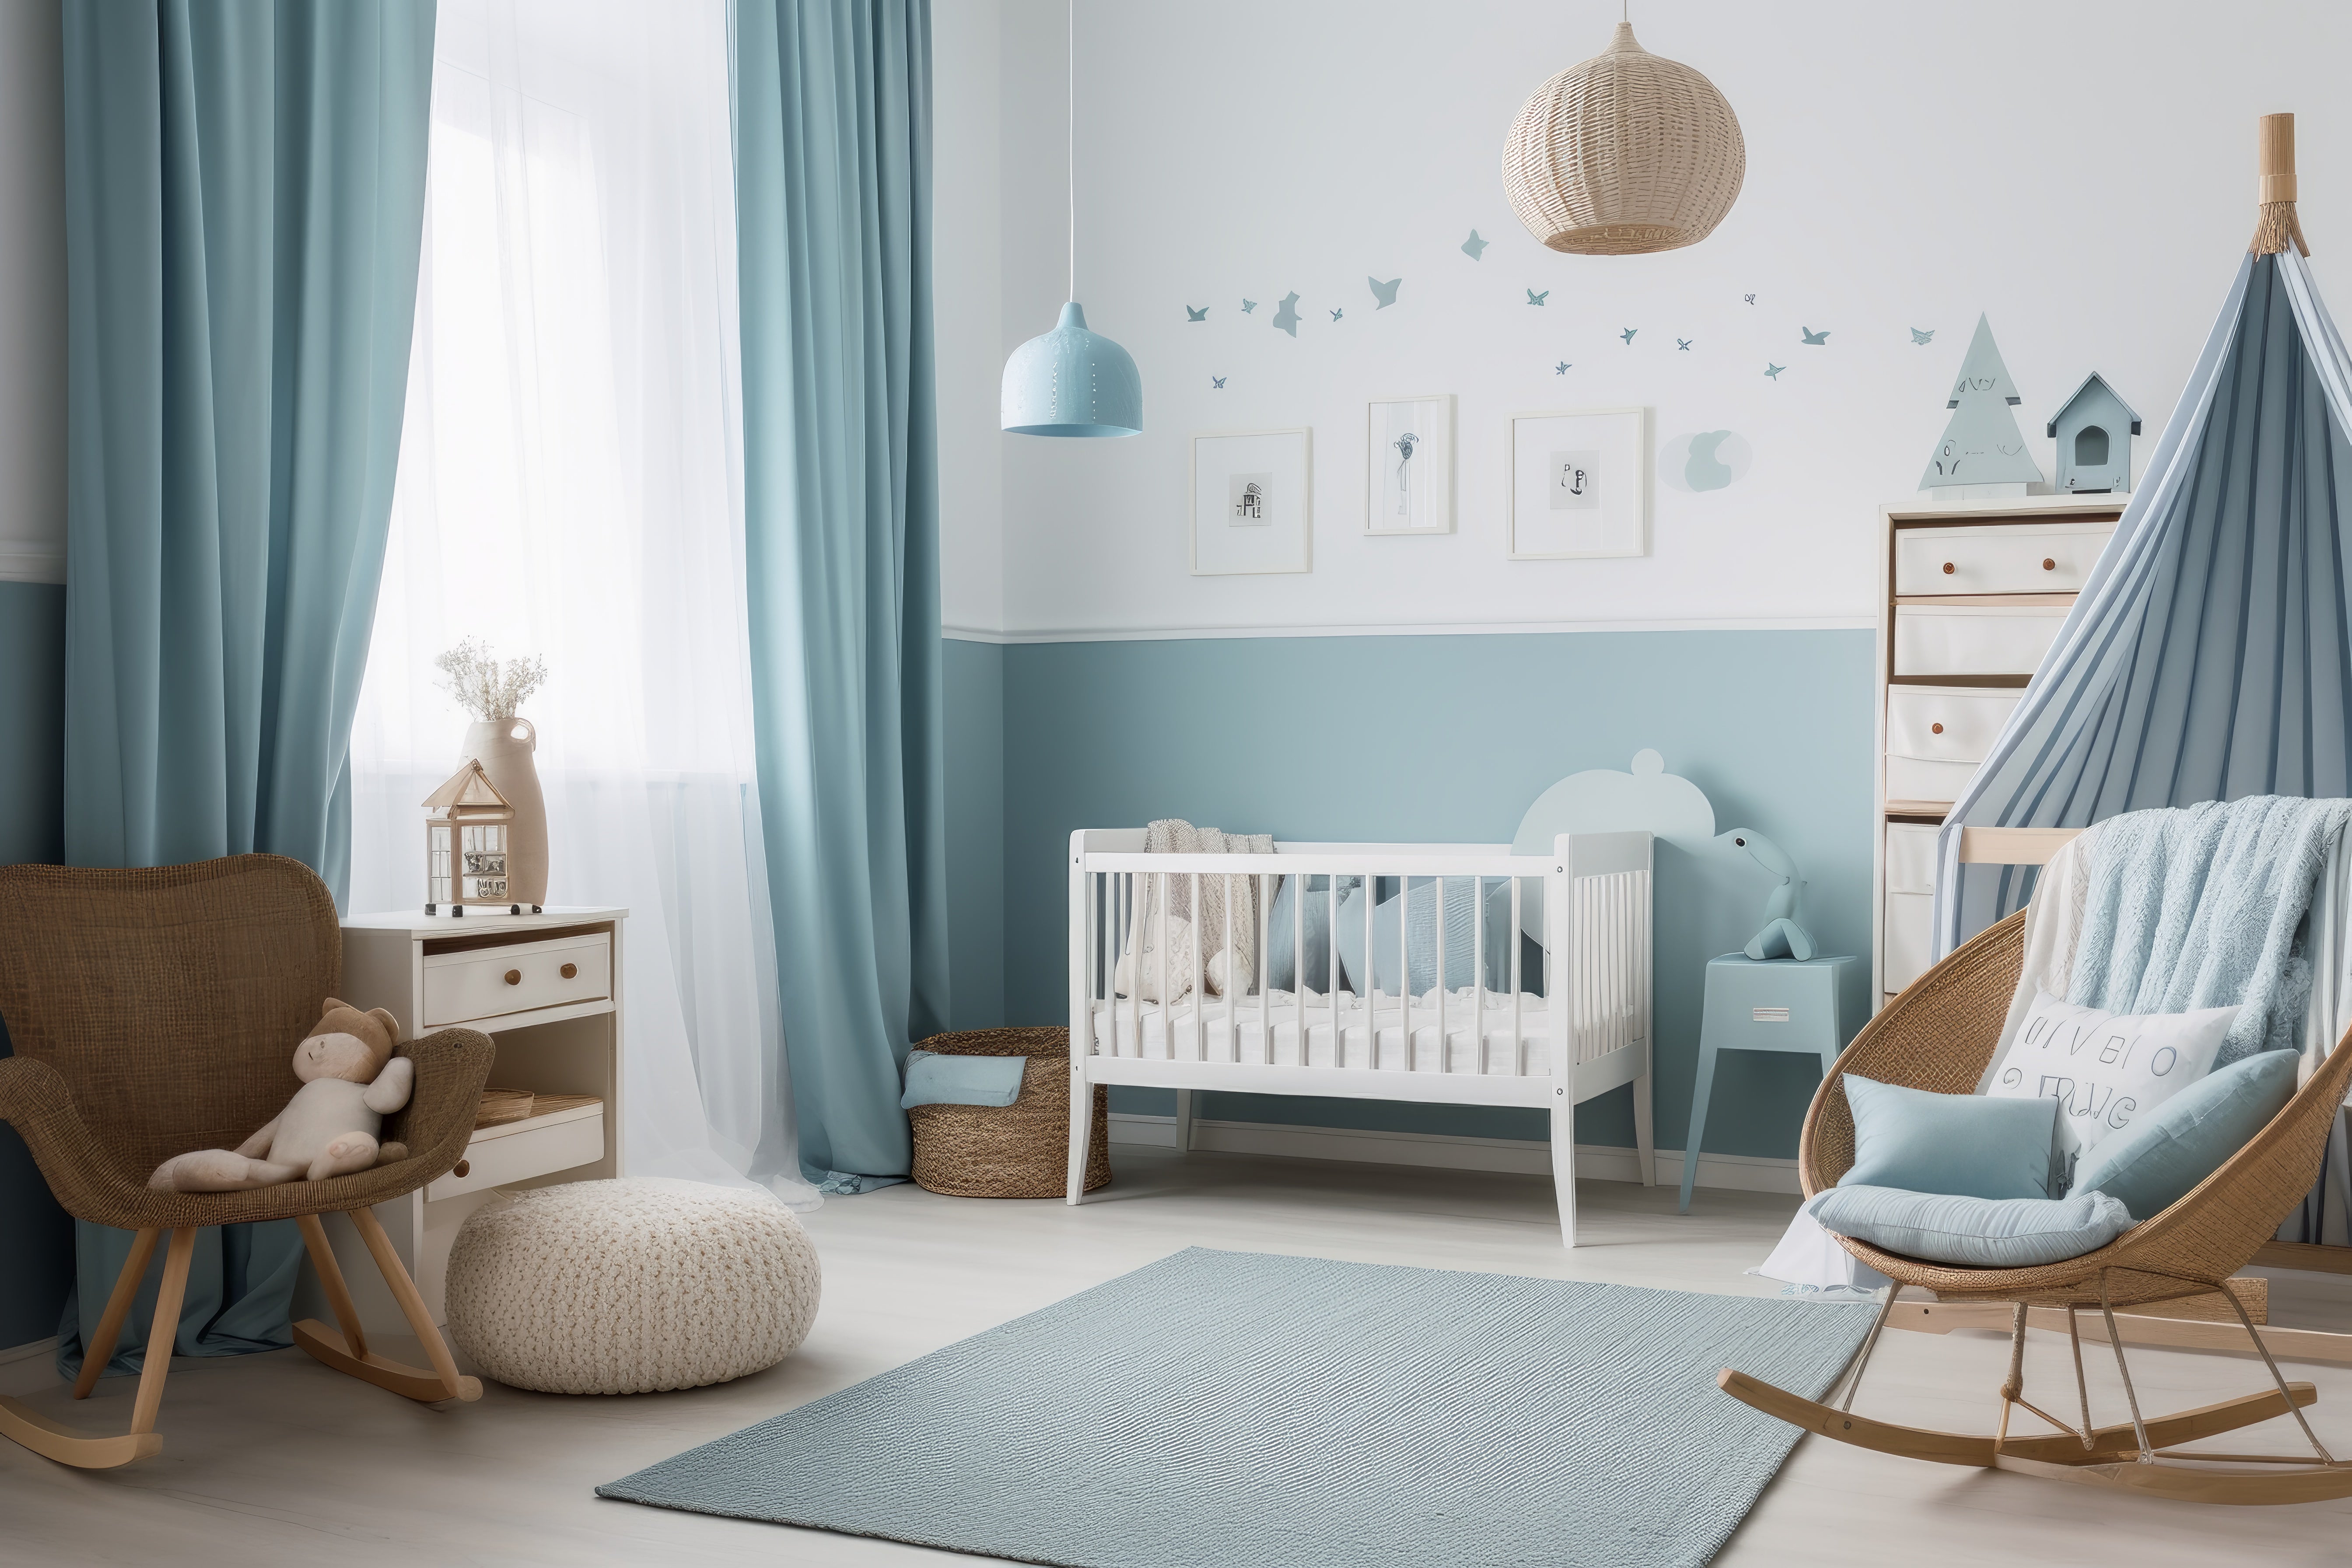 Guide to Nursery Room Decoration: Colours, Furniture, Baby Proofing & More